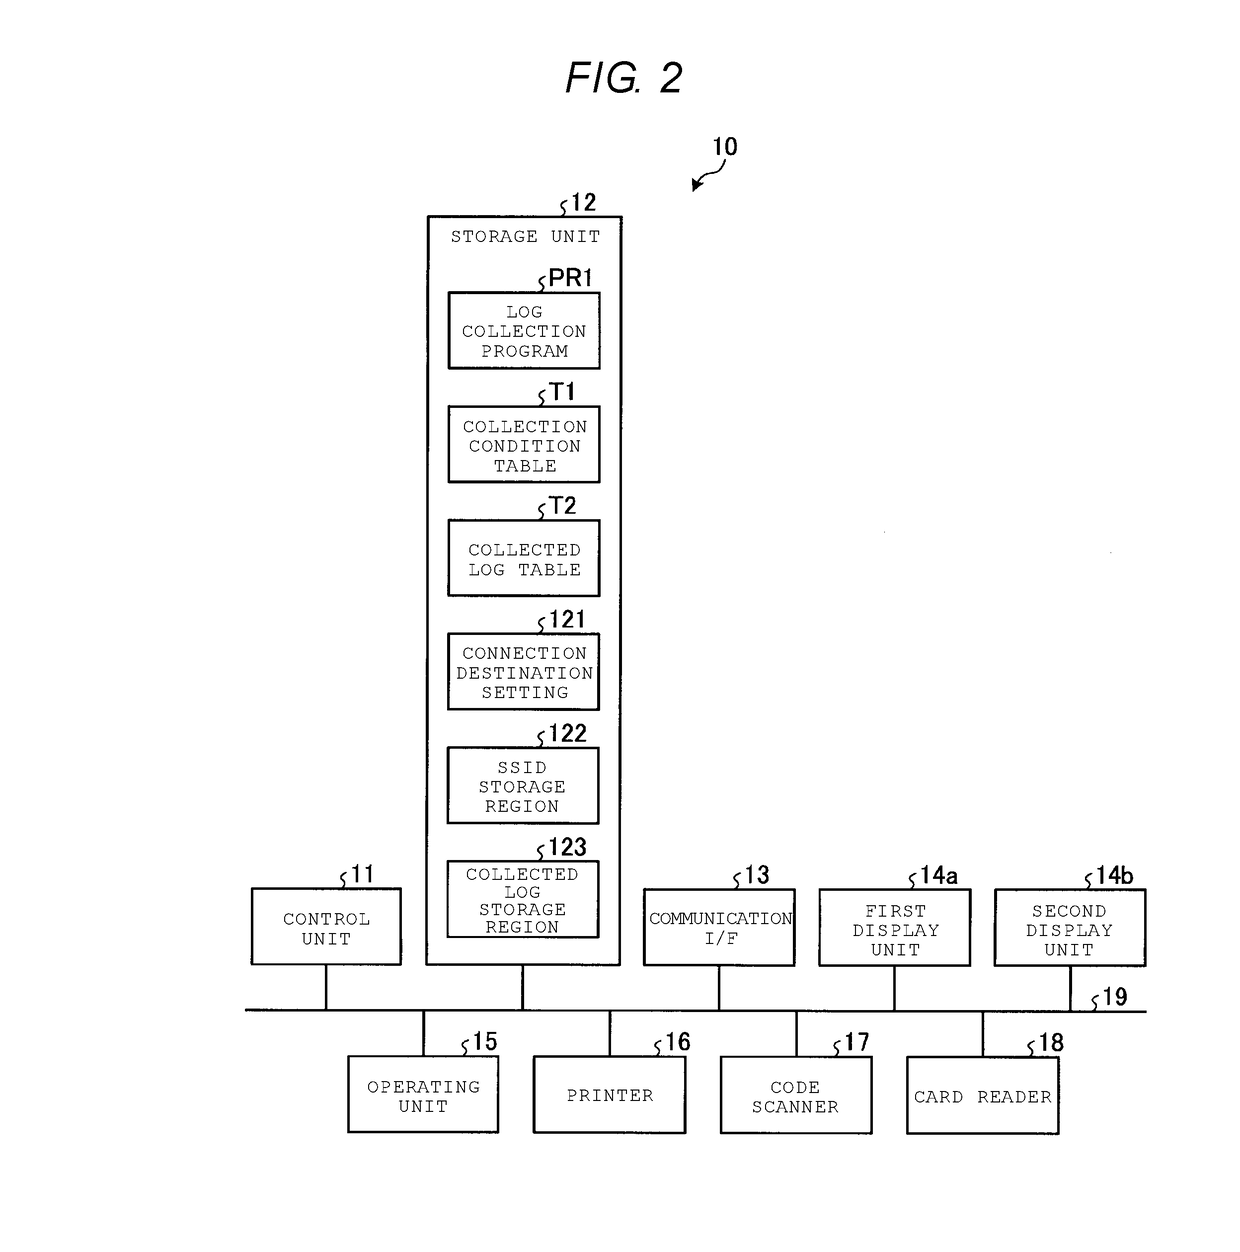 Transmission of log information for device maintenance through a network